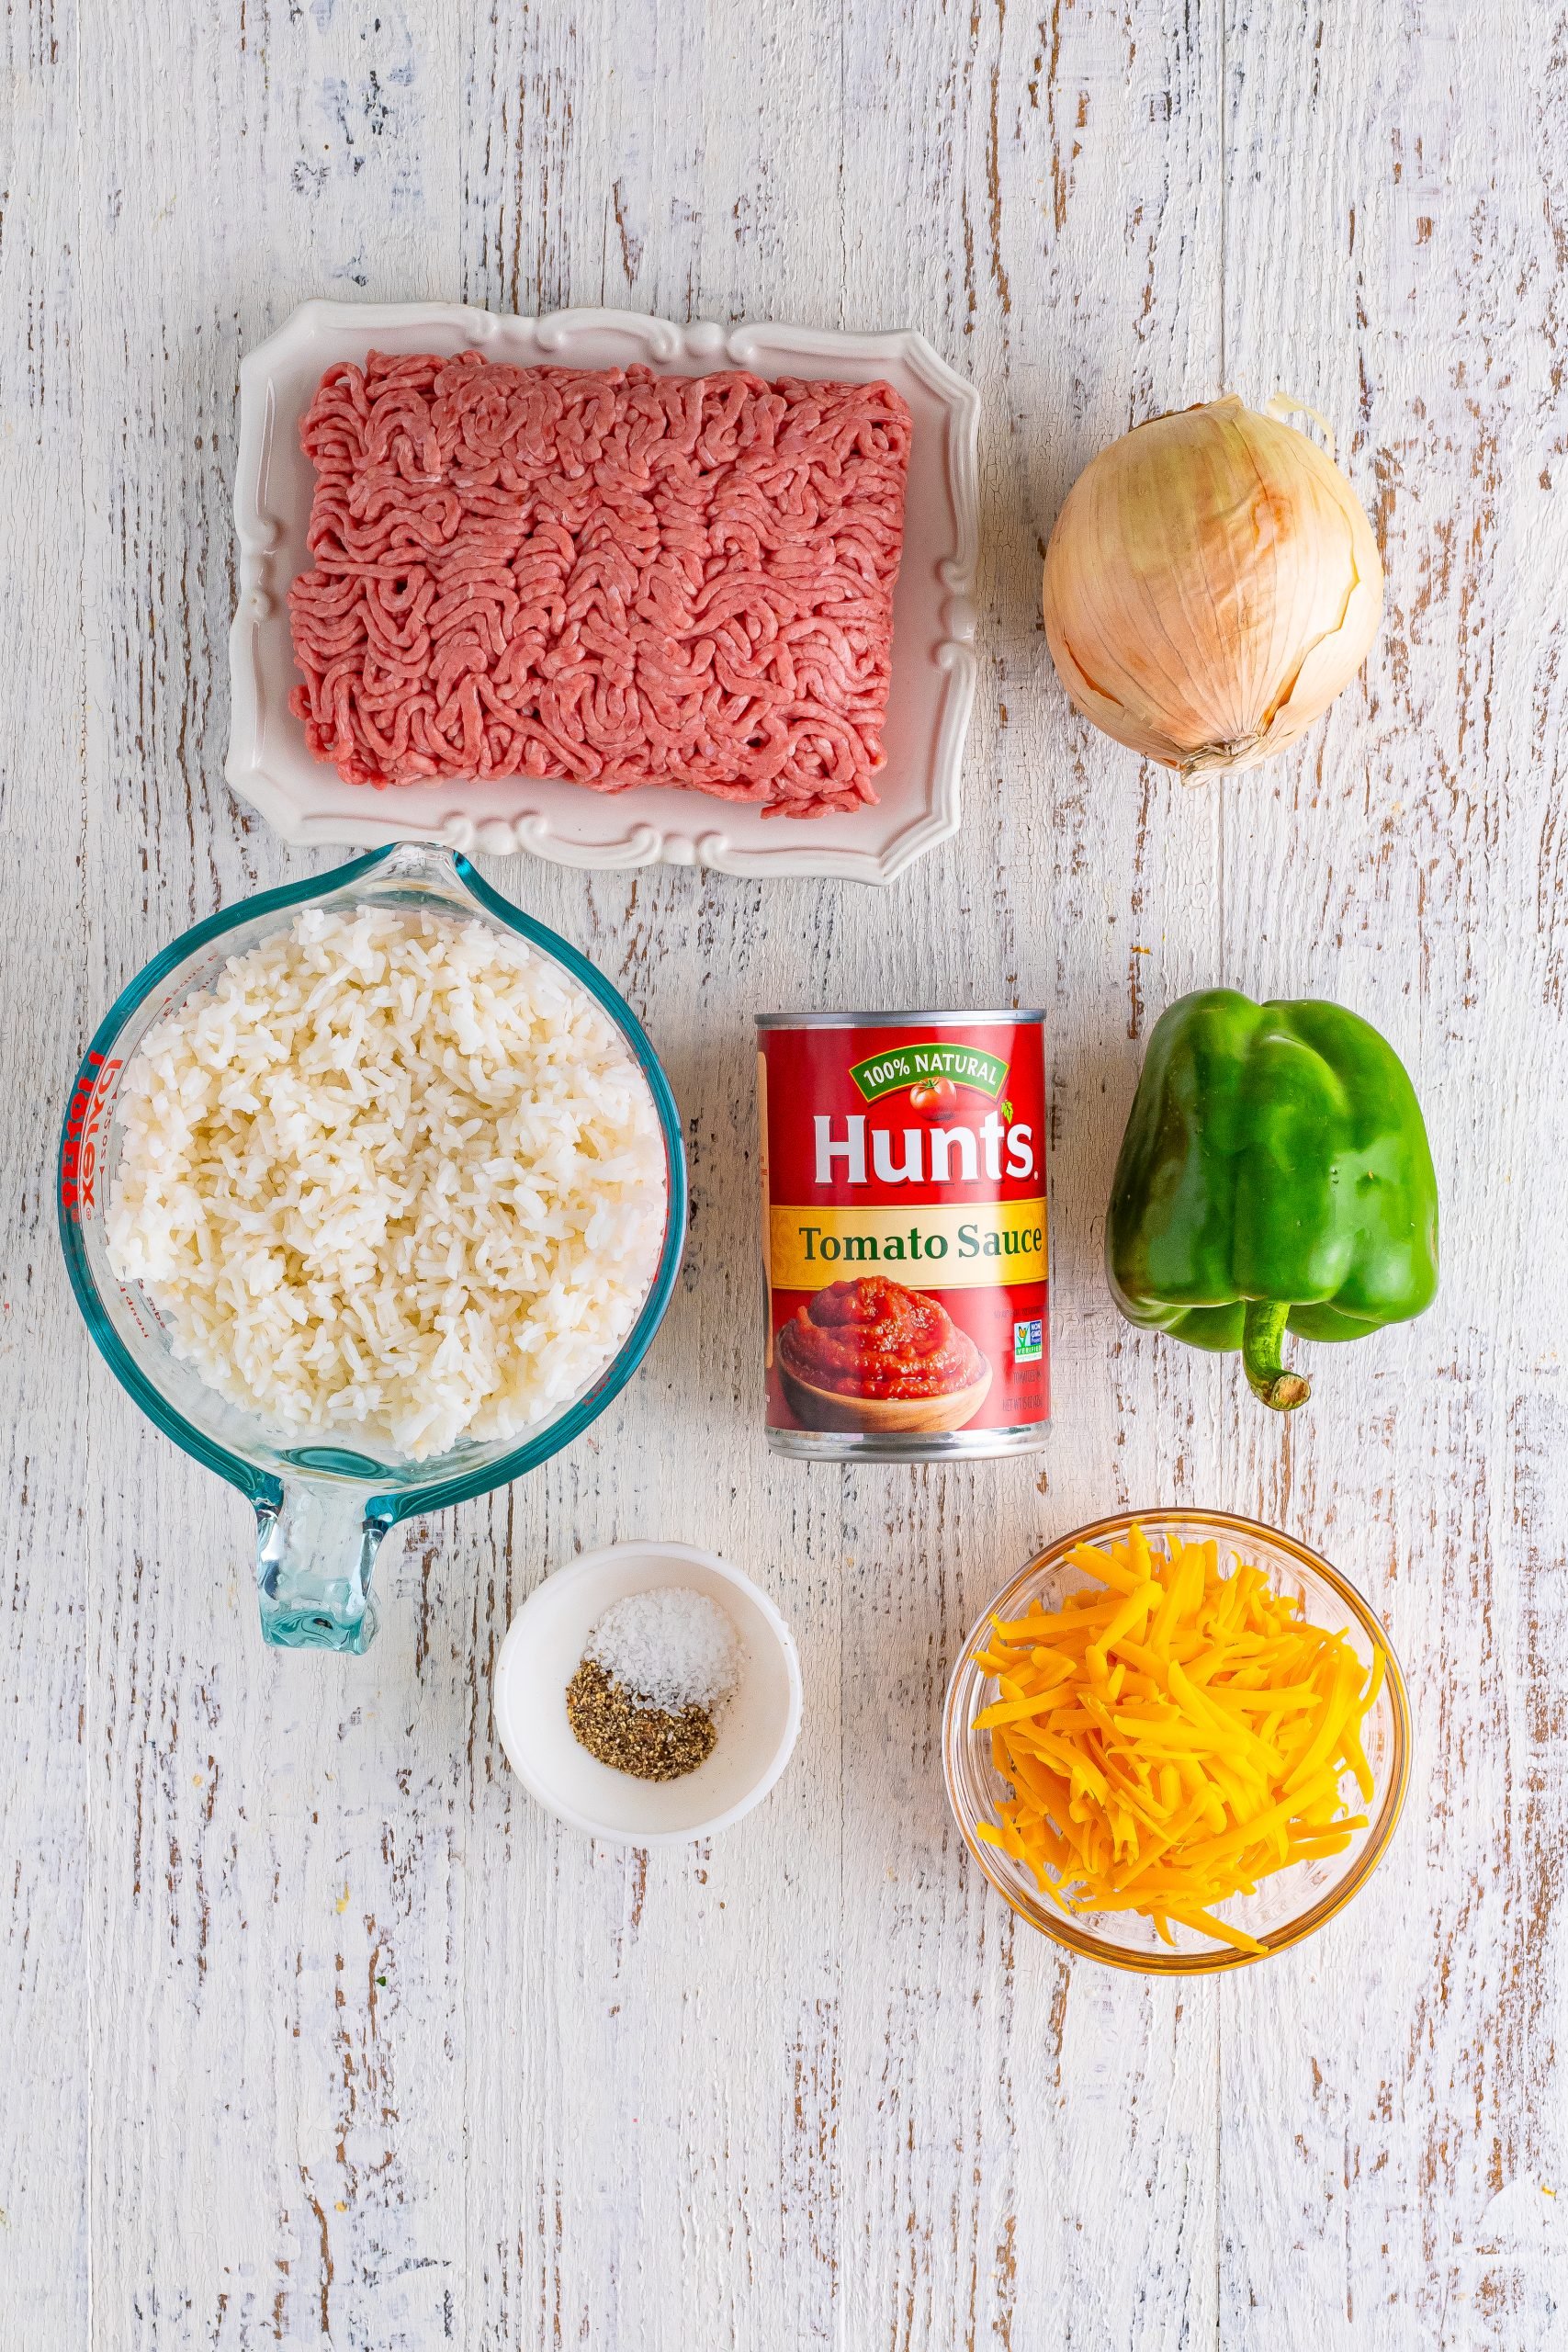 Ground beef, rice, tomato sauce, onion, green bell pepper, salt, pepper, and shredded cheese.